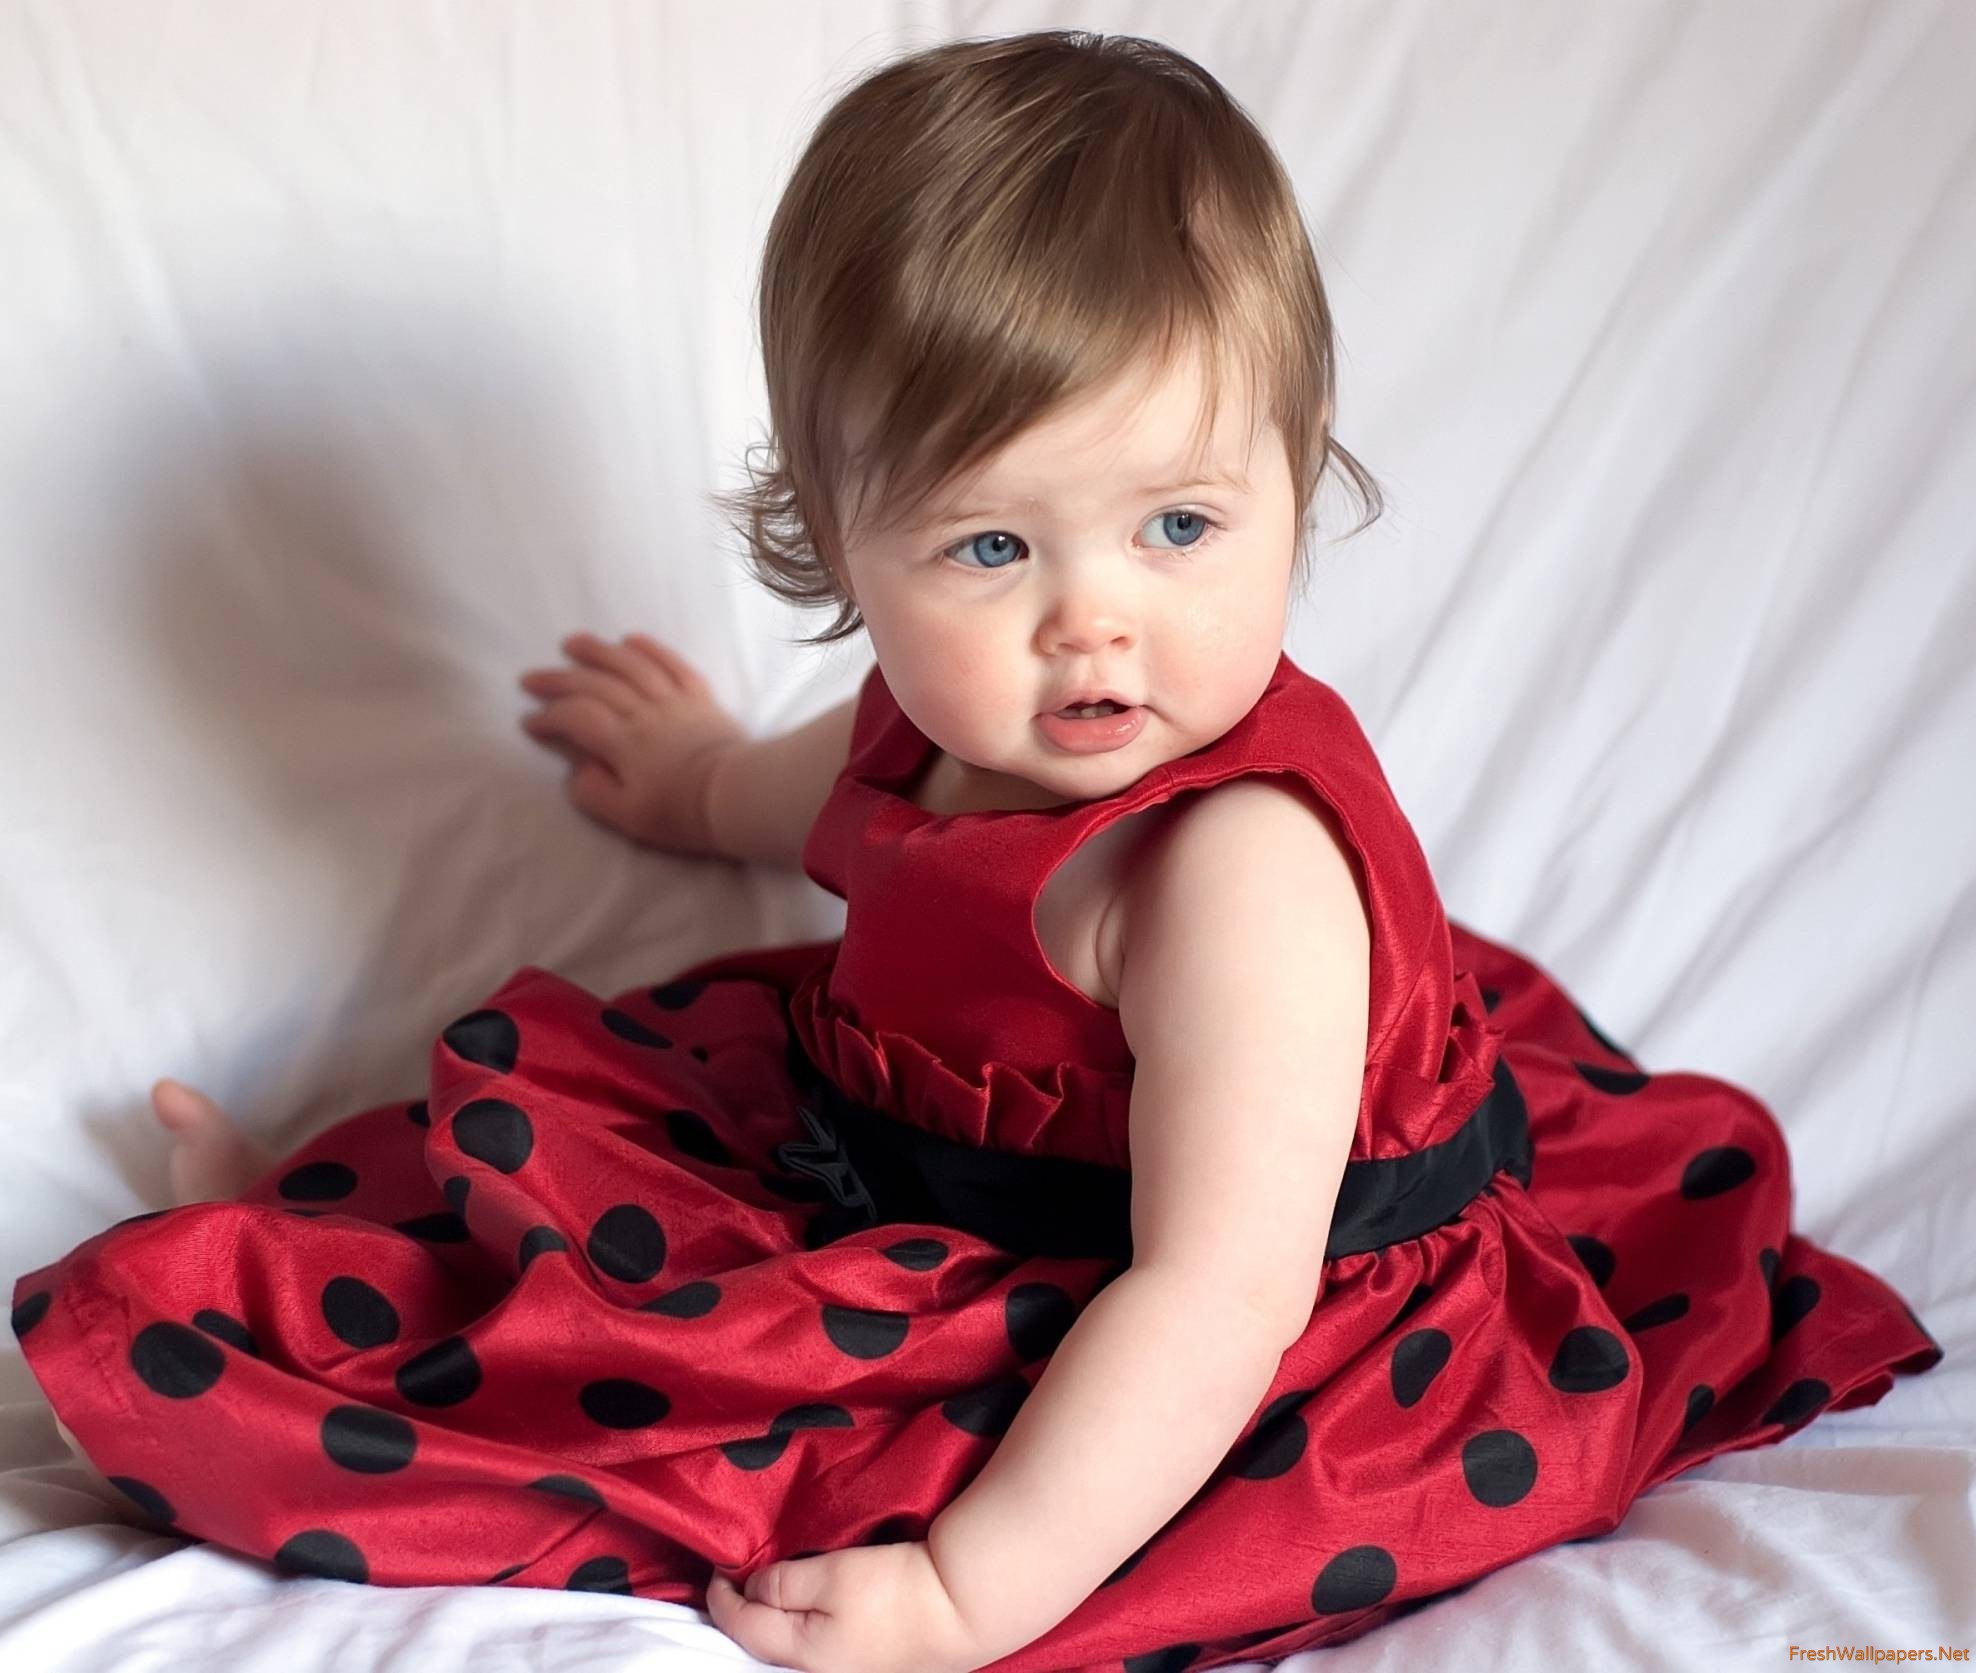 cute little baby girl in red dress wallpapers | Freshwallpapers